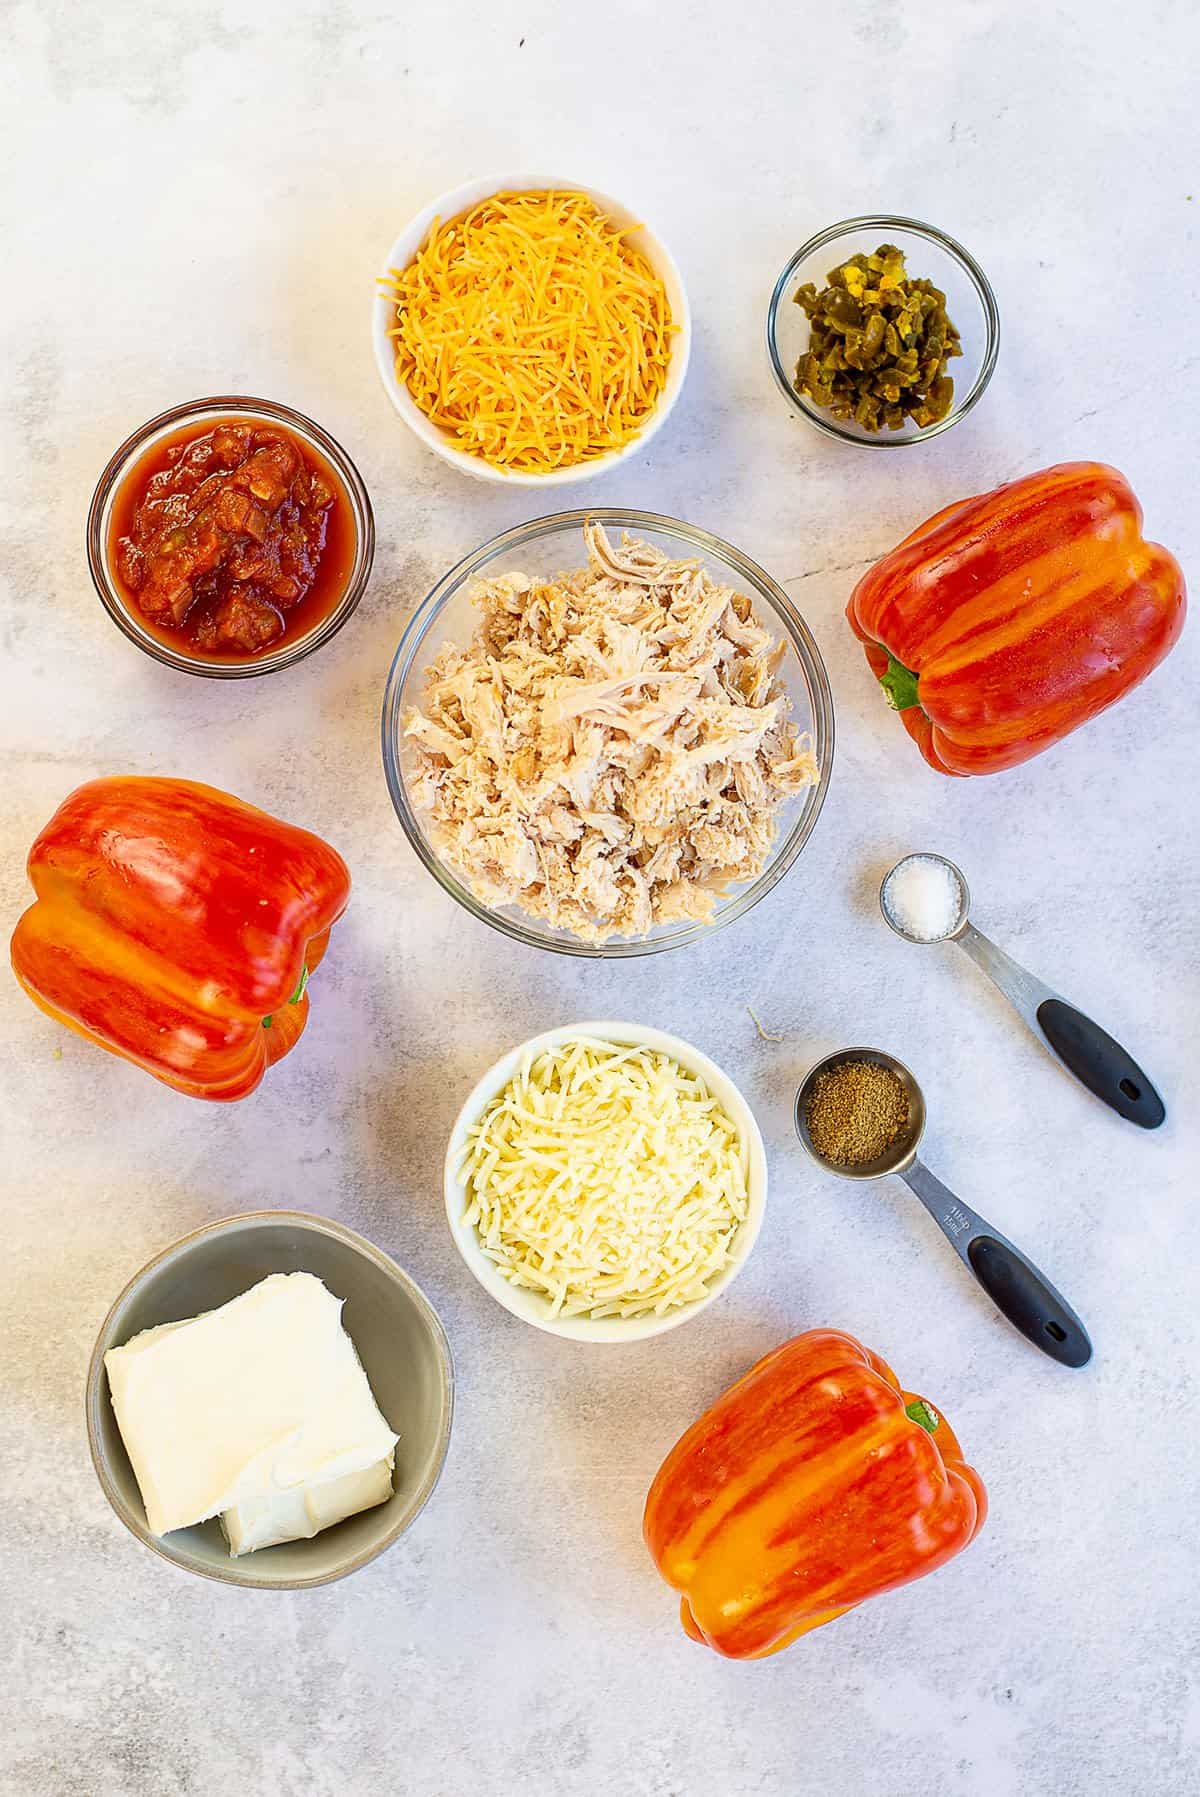 ingredients for stuffed peppers.